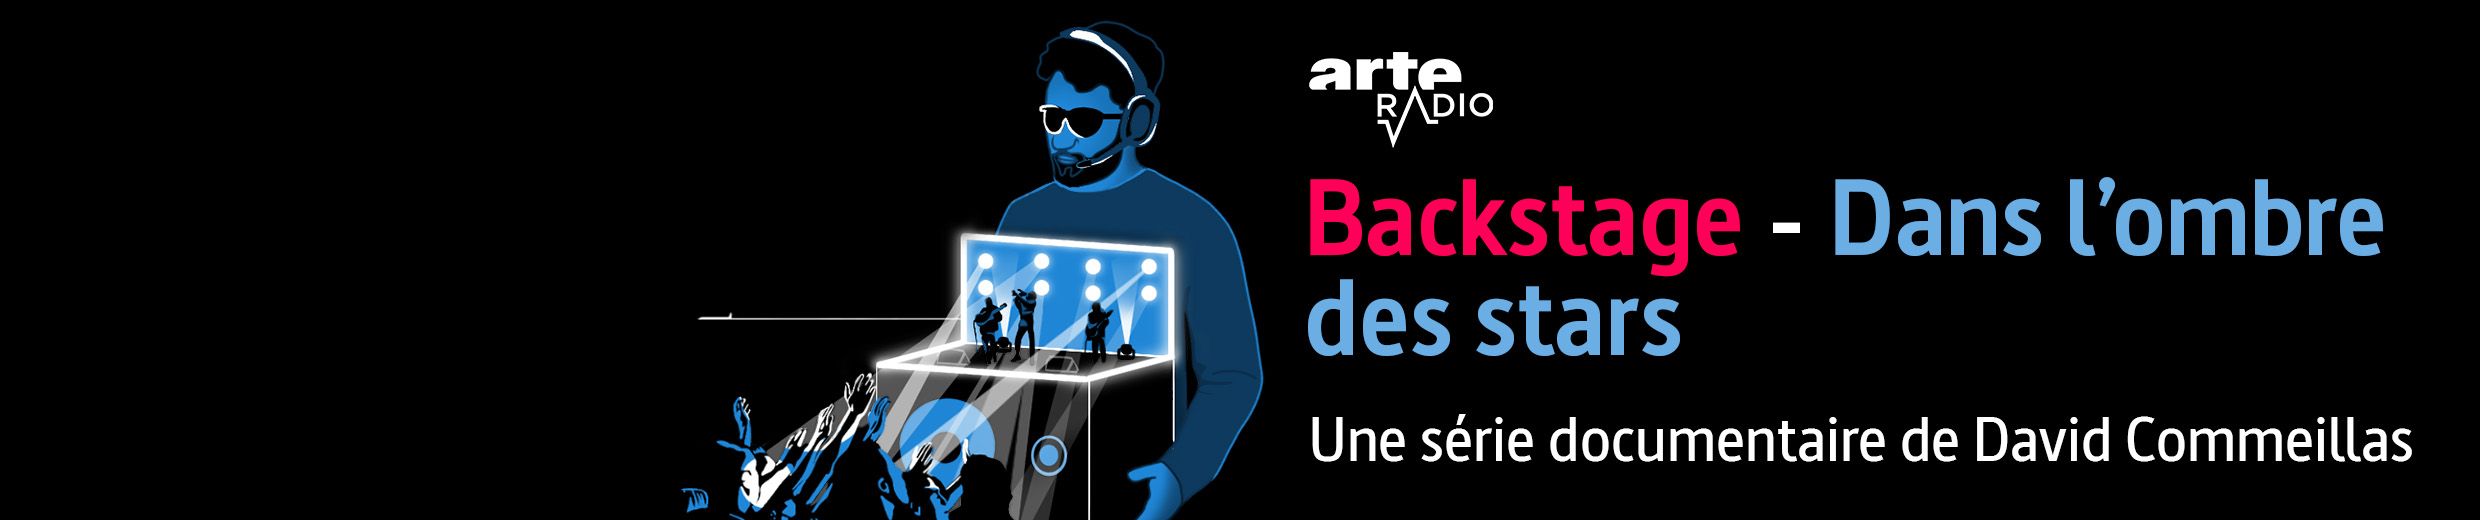 Stream ARTE Radio | Listen to podcast episodes online for free on SoundCloud